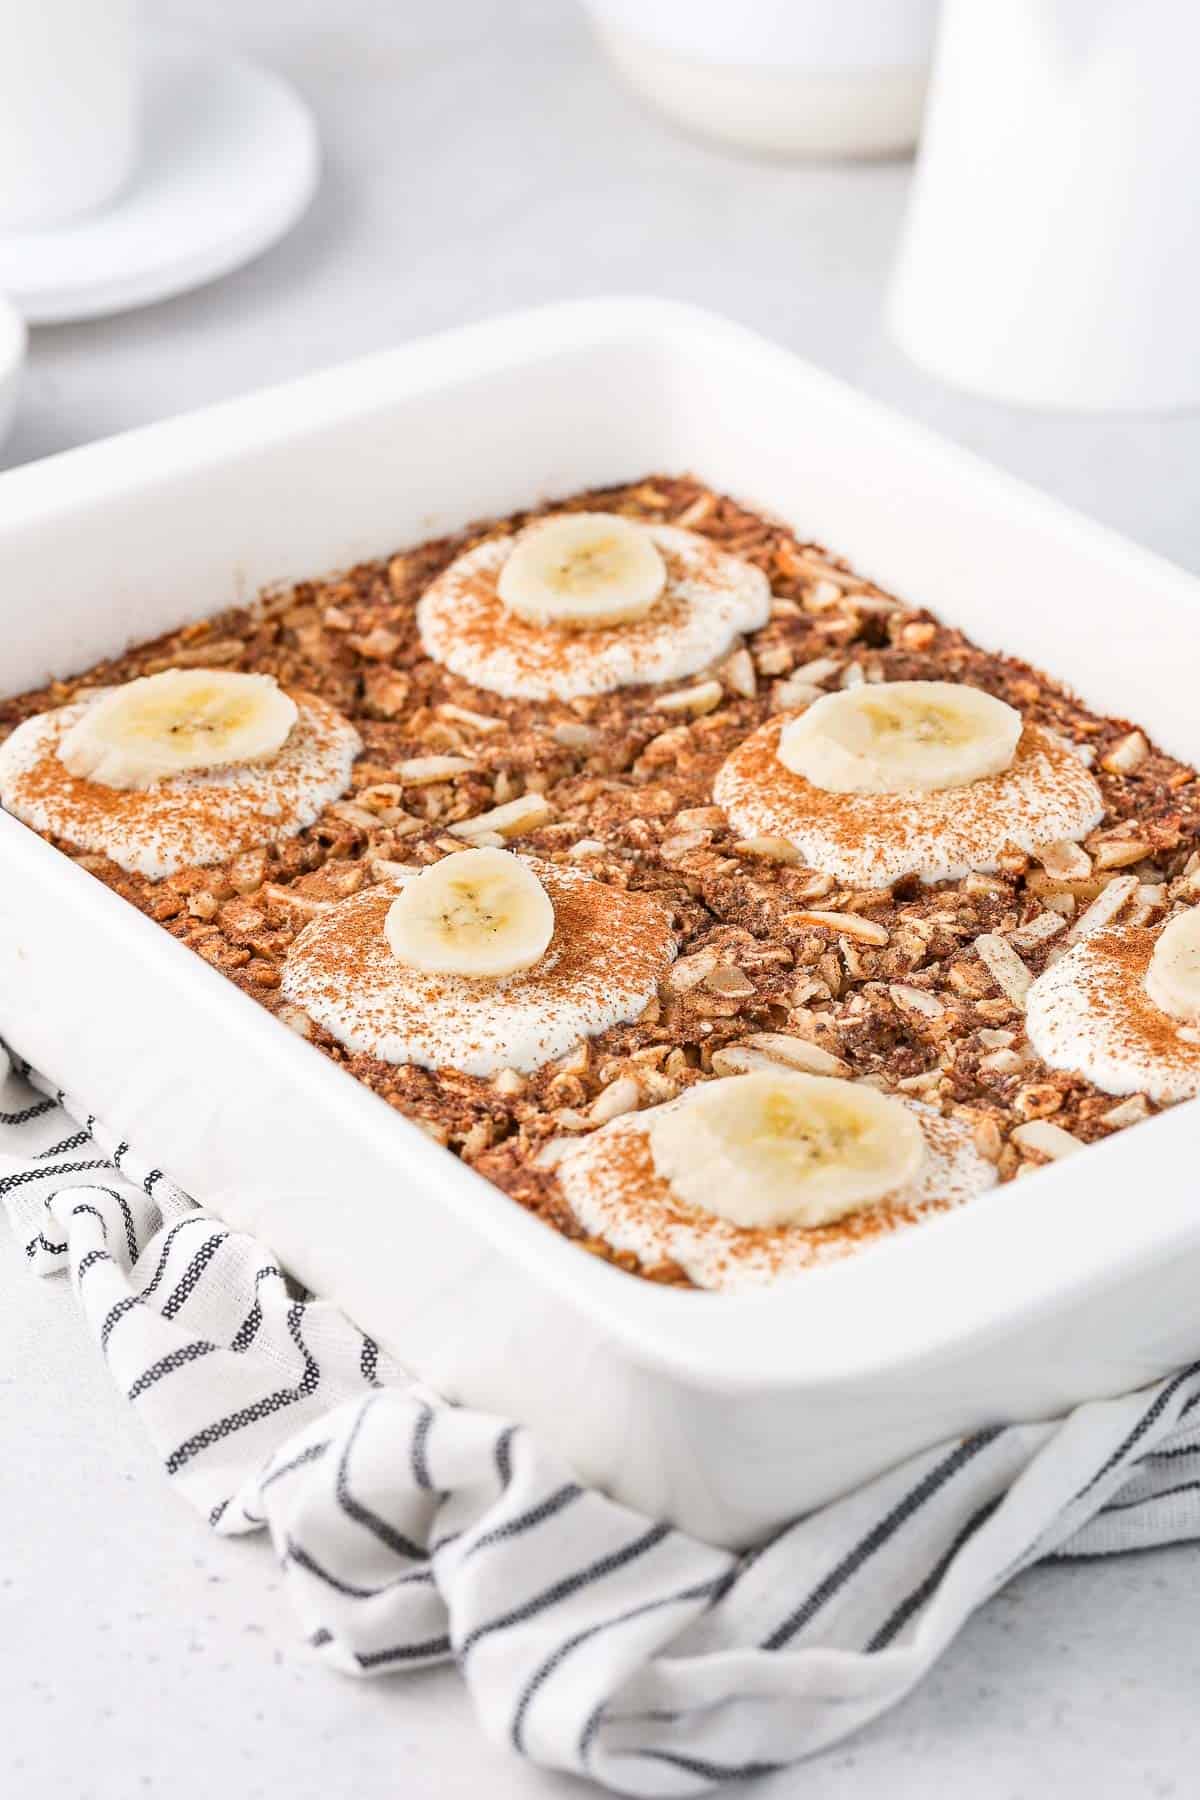 White rectangular dish of baked banana oatmeal, cut into six pieces.